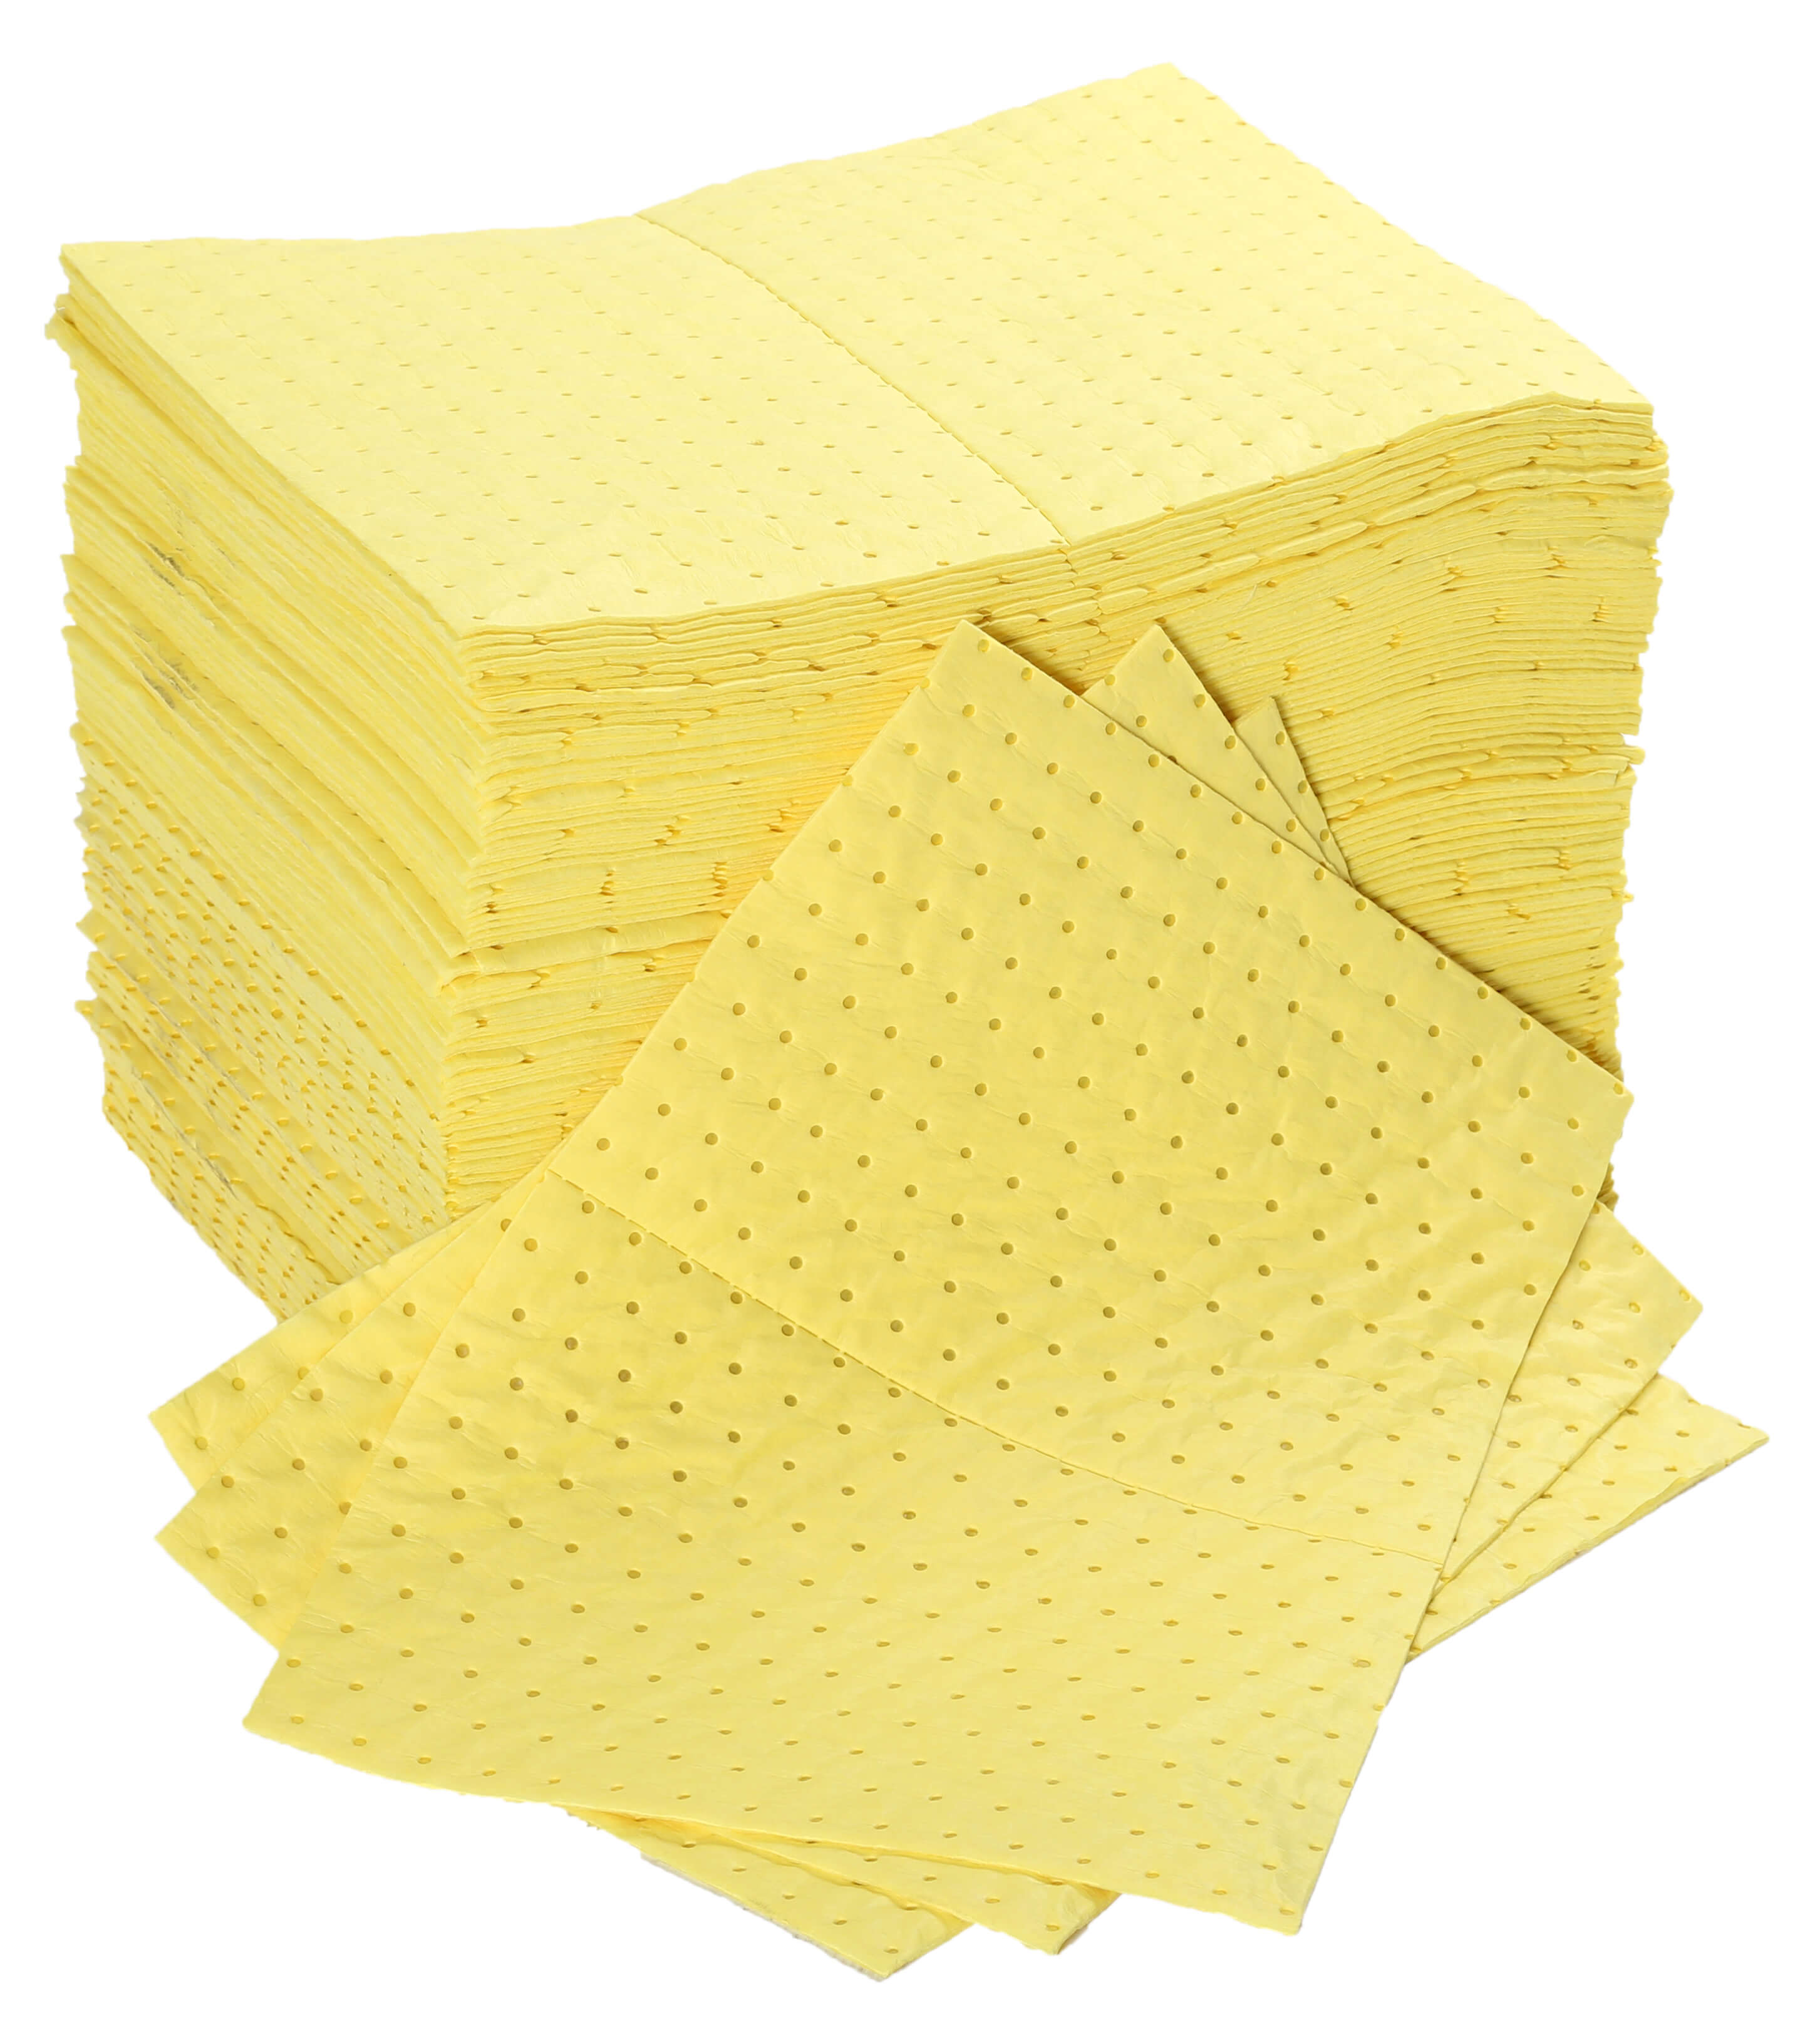 Medium Weight Chemical Absorbent Pads - Polywrapped, Pack of 200